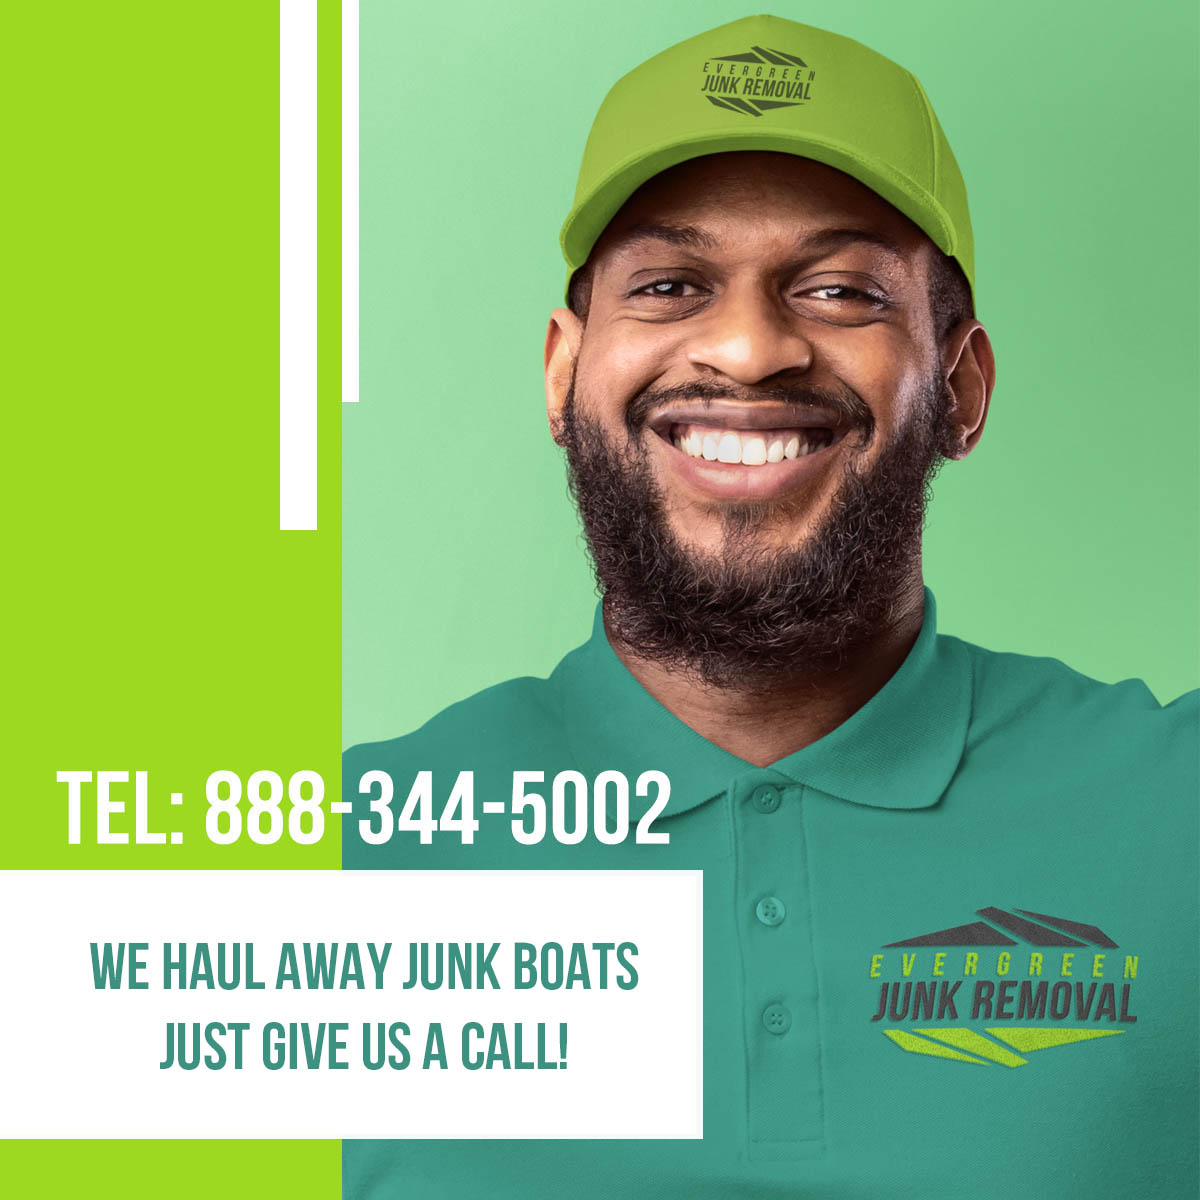 Boat Removal Company West Palm Beach